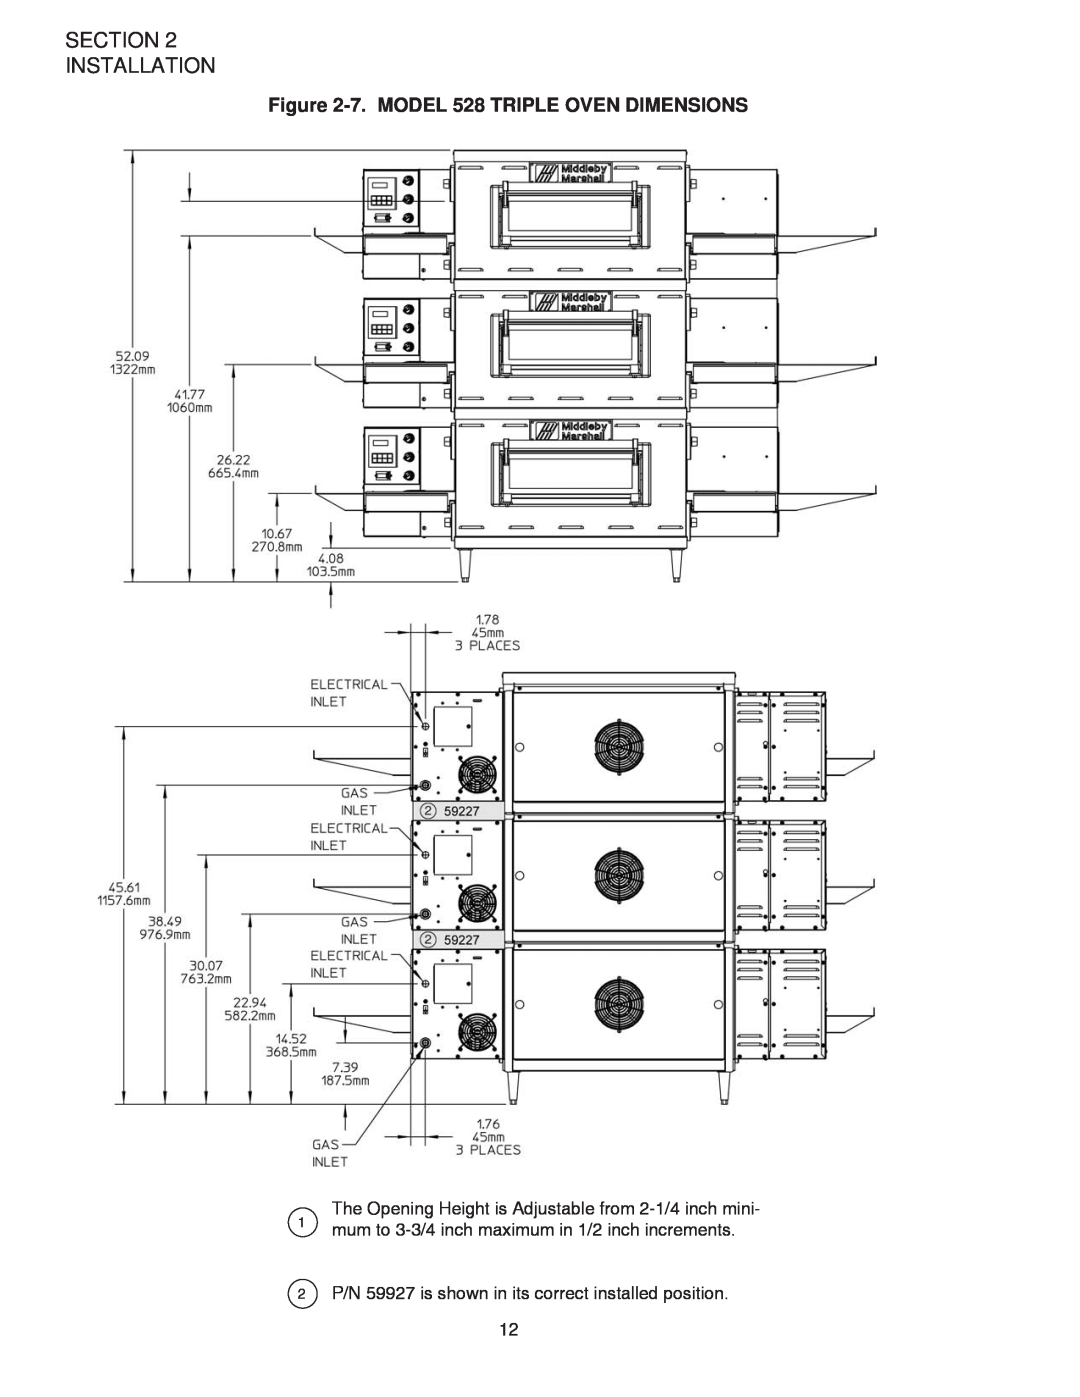 Middleby Marshall PS528G installation manual Section Installation, 7. MODEL 528 TRIPLE OVEN DIMENSIONS 